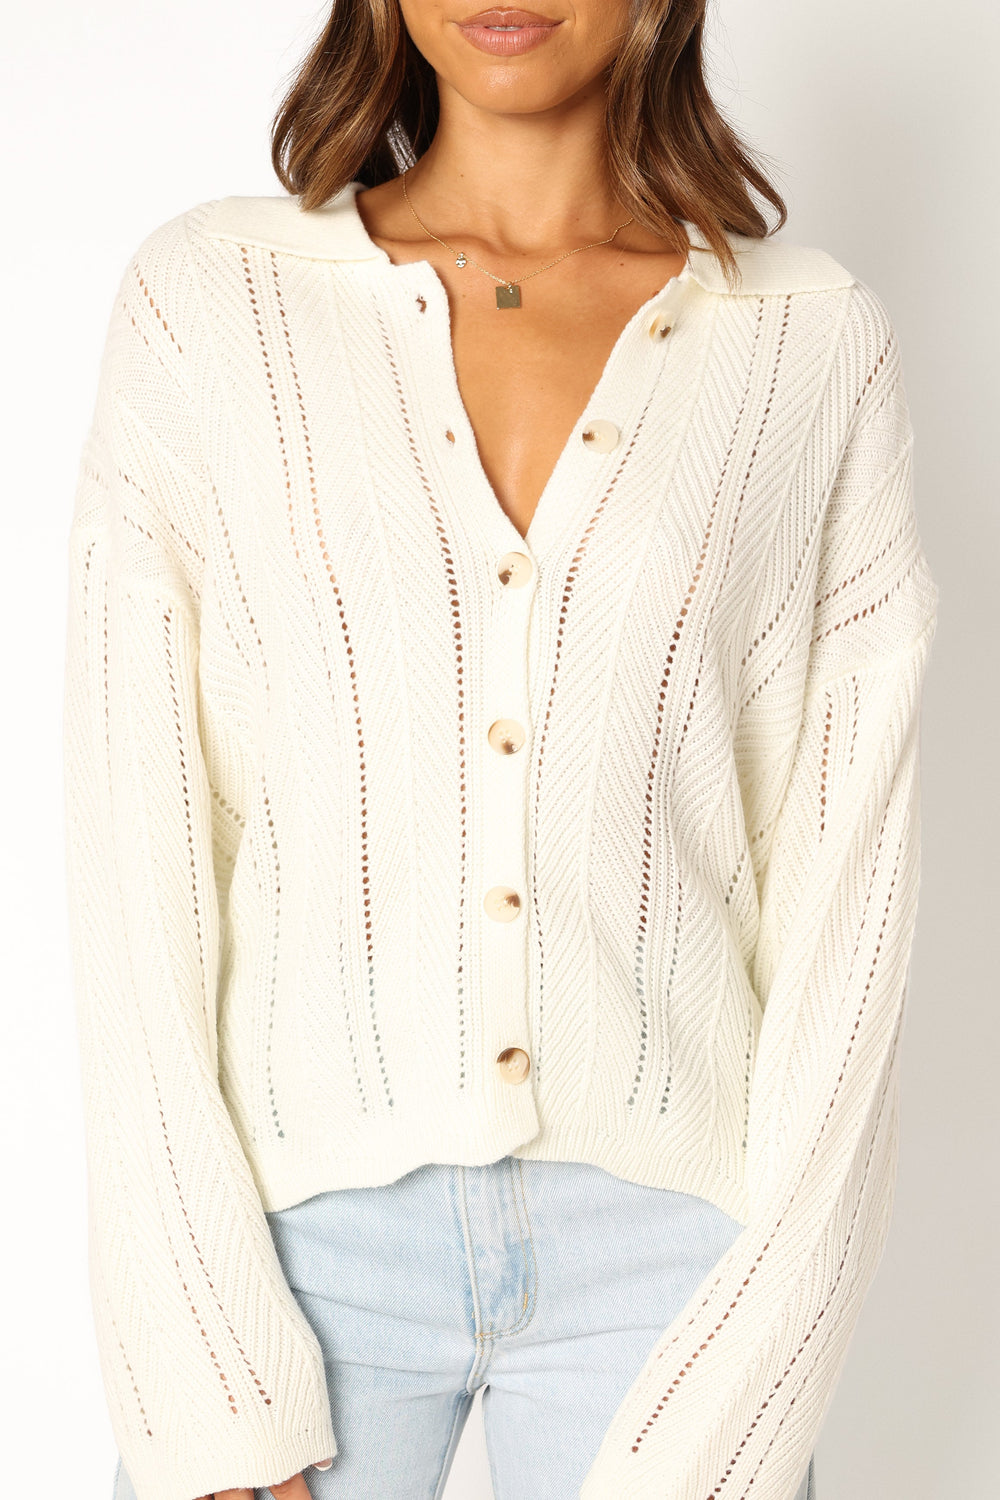 Petal and Pup USA KNITWEAR Simone Button Front Collar Knit Sweater - White